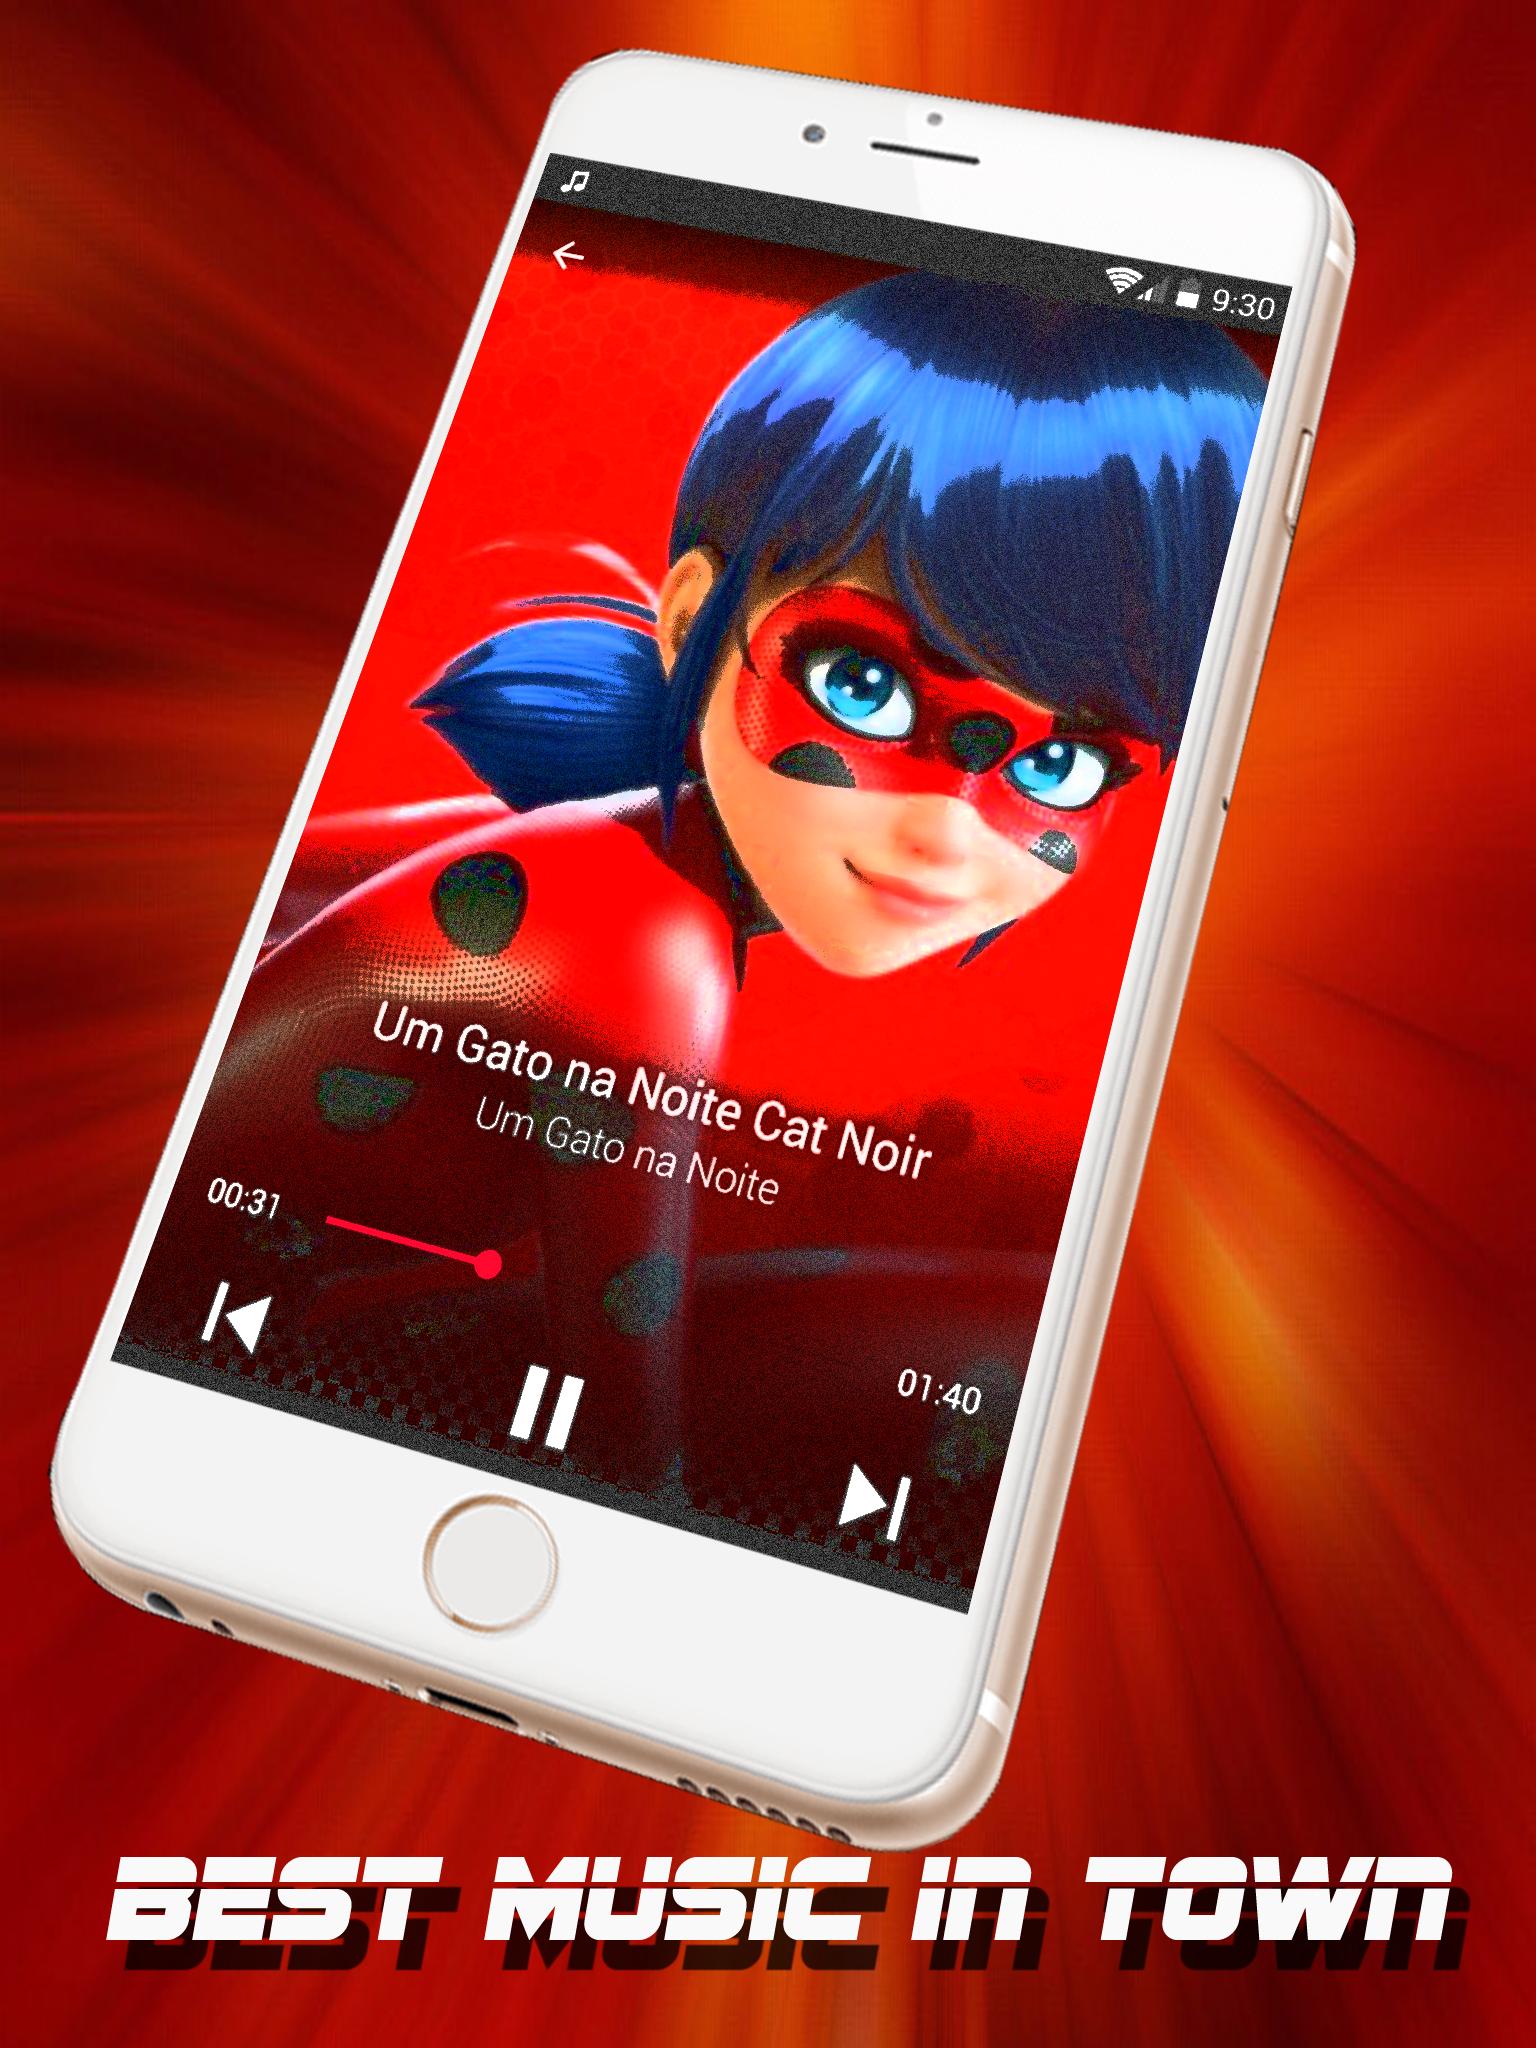 Miraculous Ladybug Soundtrack For Android Apk Download - miraculous ladybug theme song roblox id